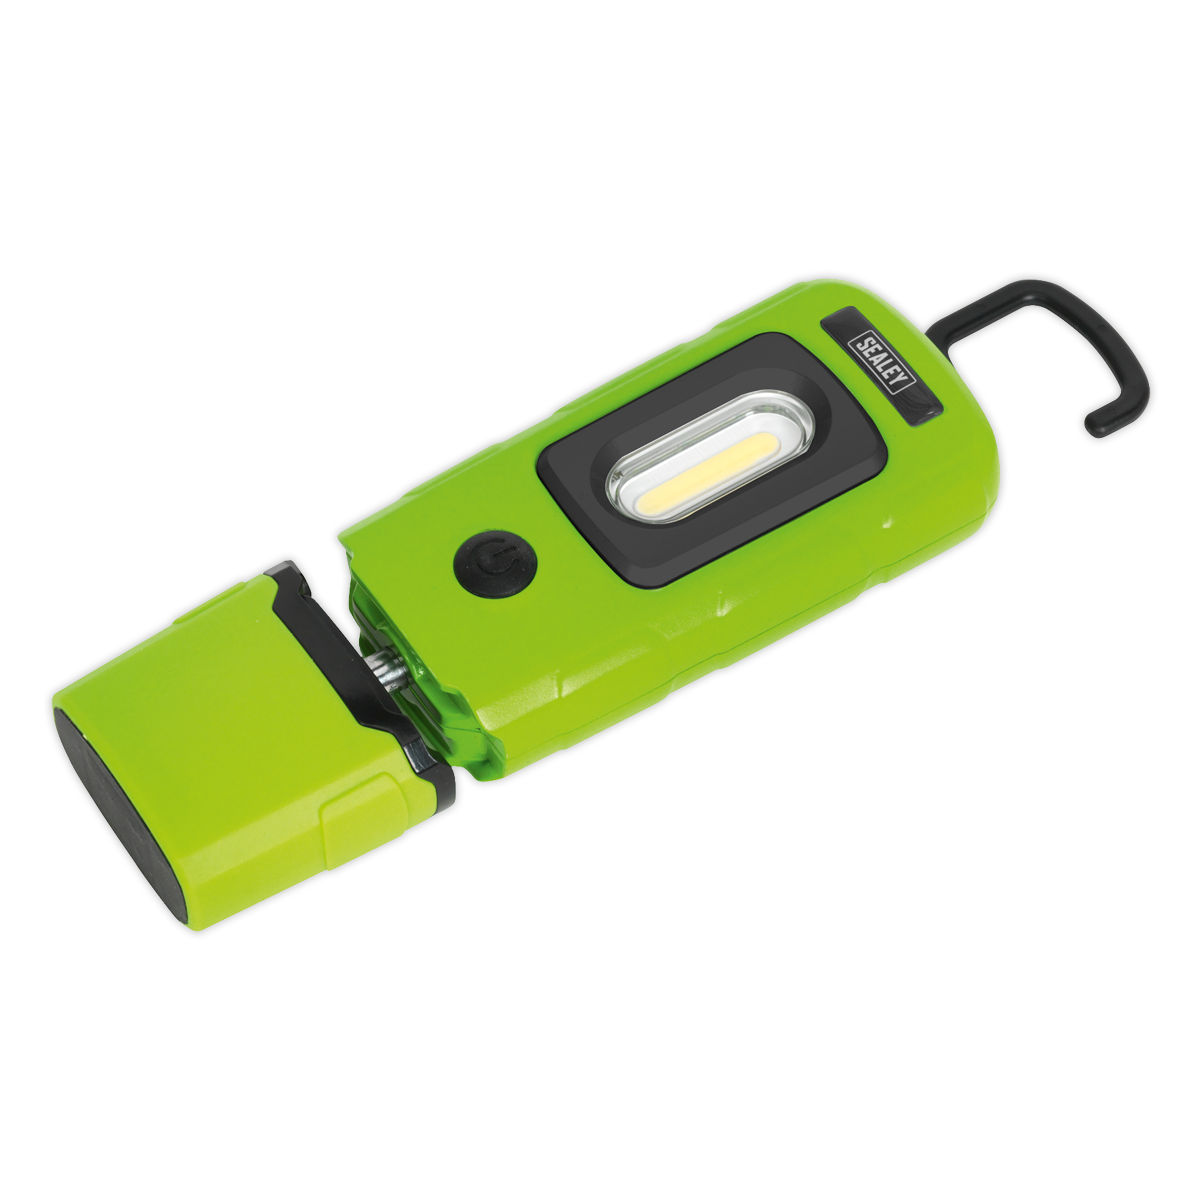 Rechargeable 360° Inspection Light 3W COB & 1W SMD LED Green Lithium-Polymer - LED3601G - Farming Parts